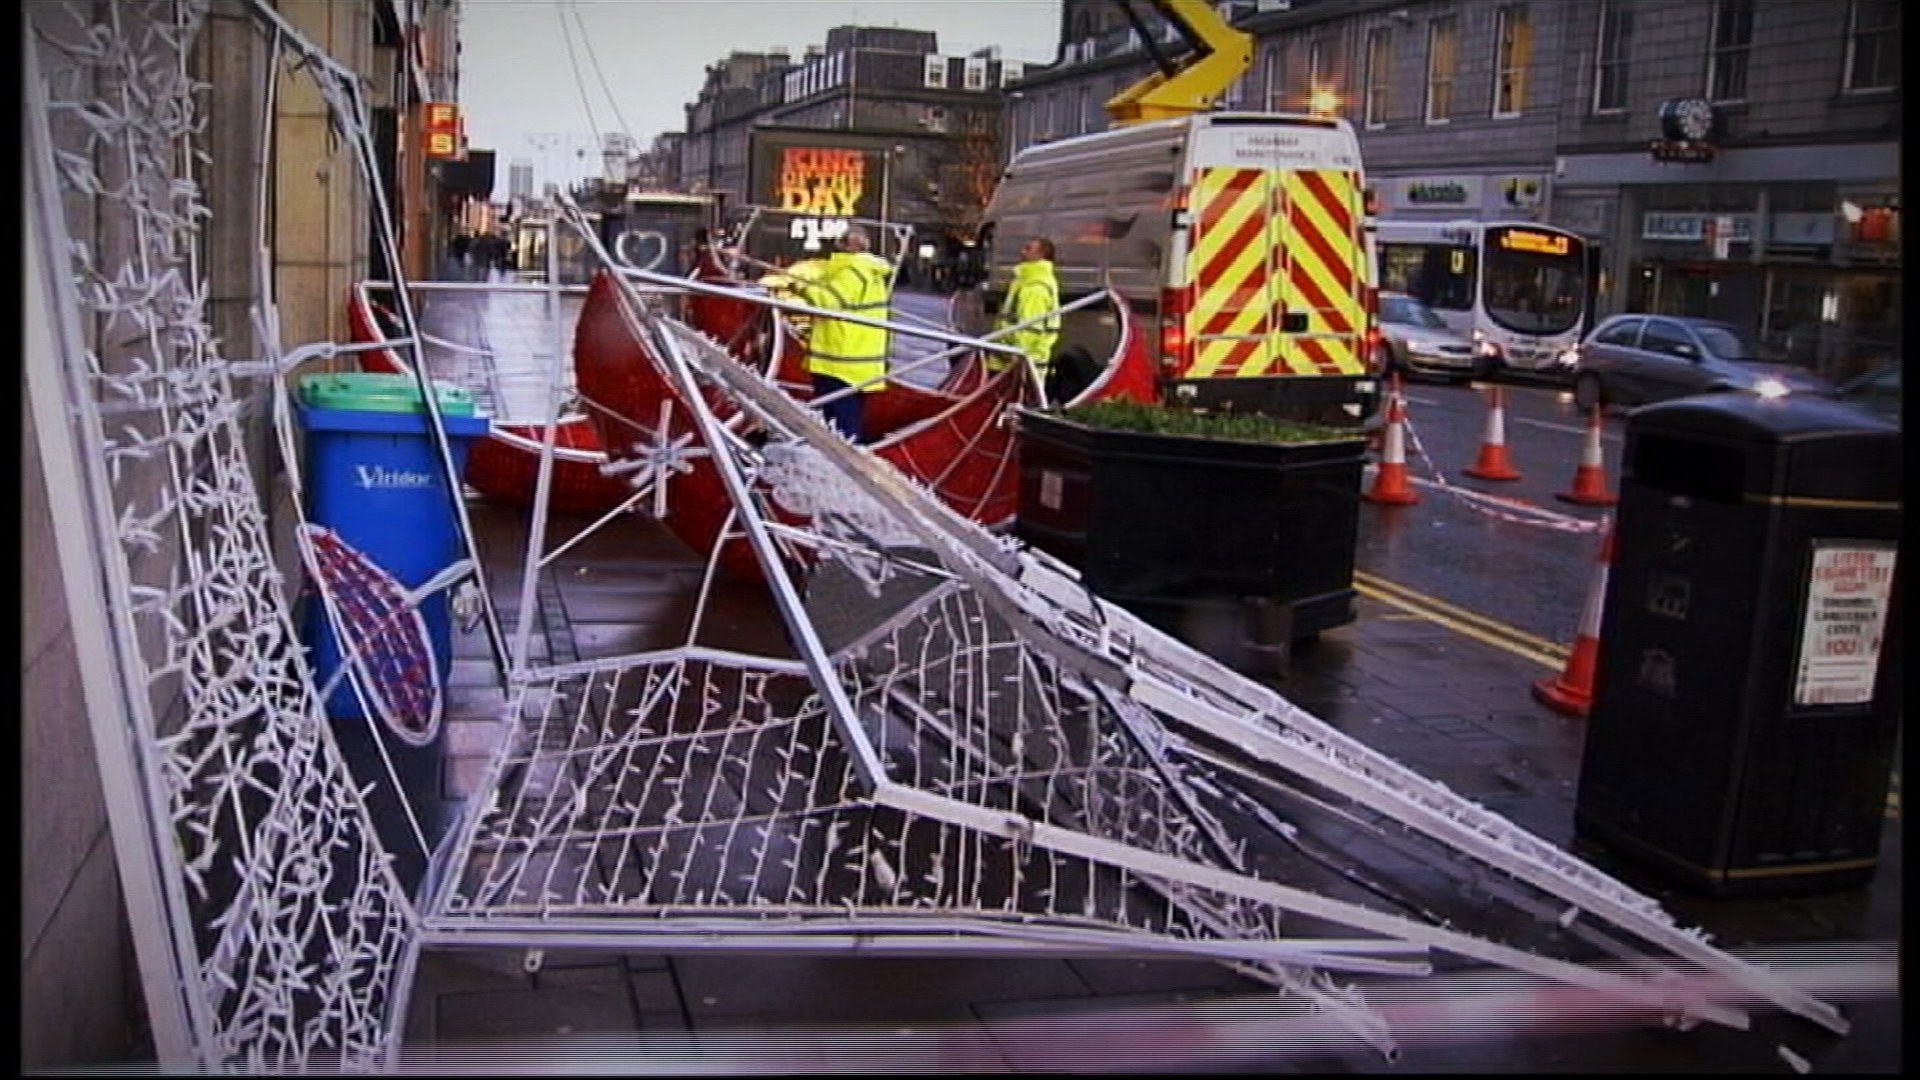 Hurricane Bawbag brought the Christmas lights down in Aberdeen.